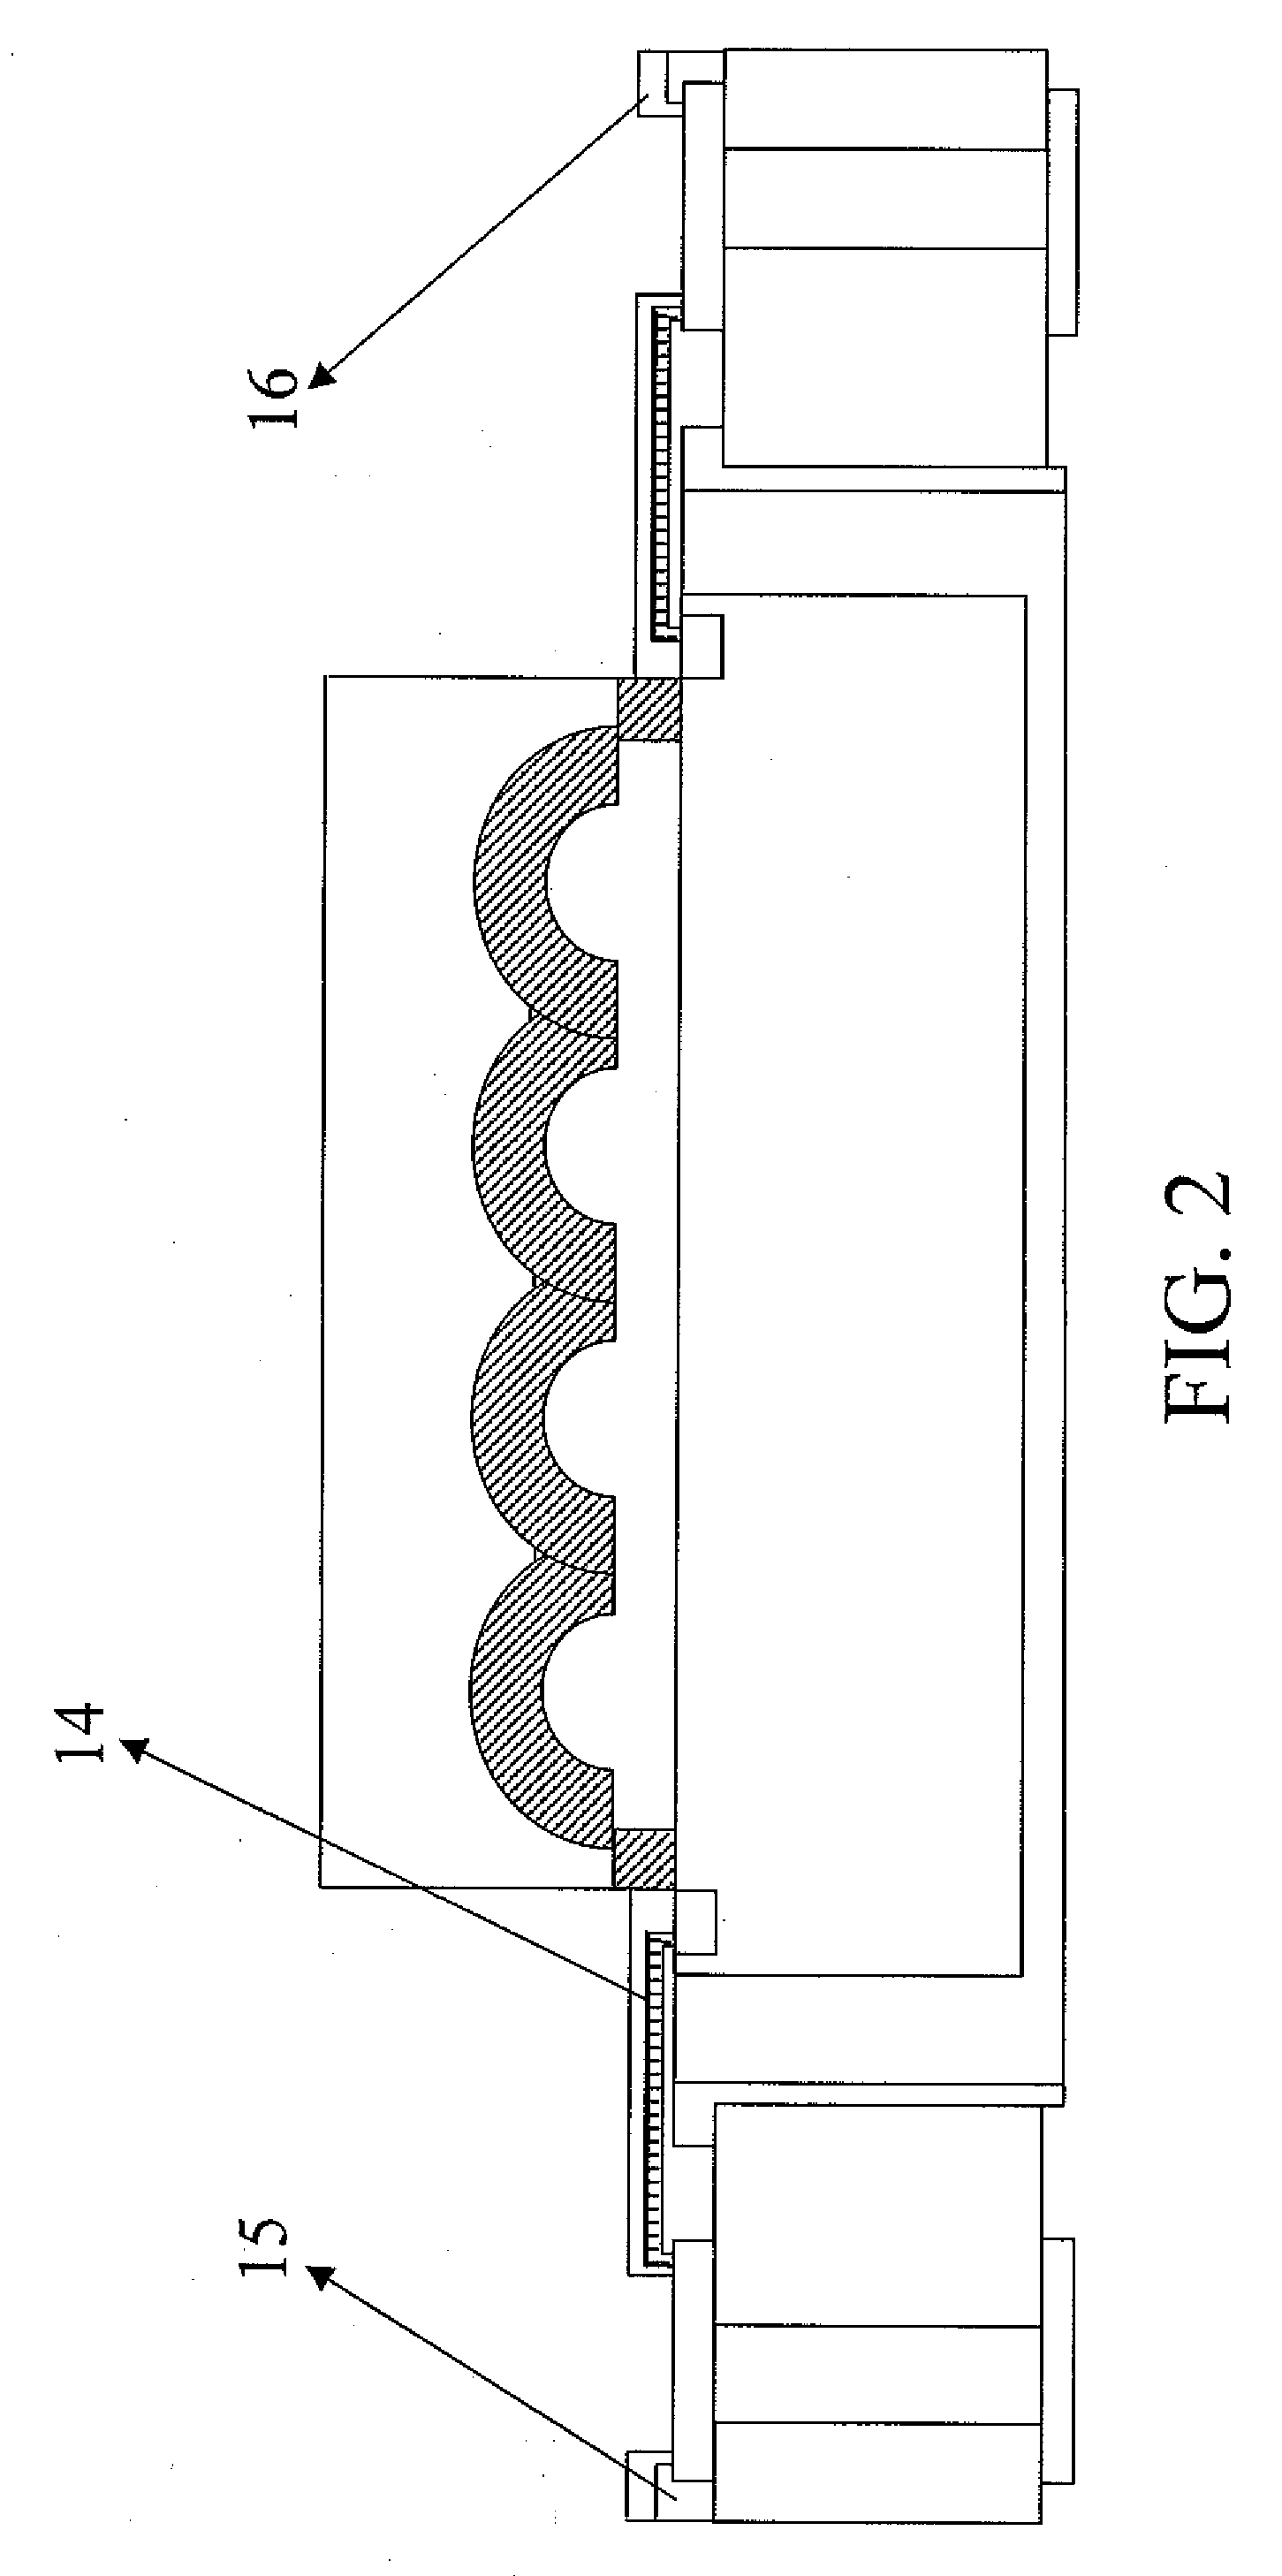 Image sensor package utilizing a removable protection film and method of making the same